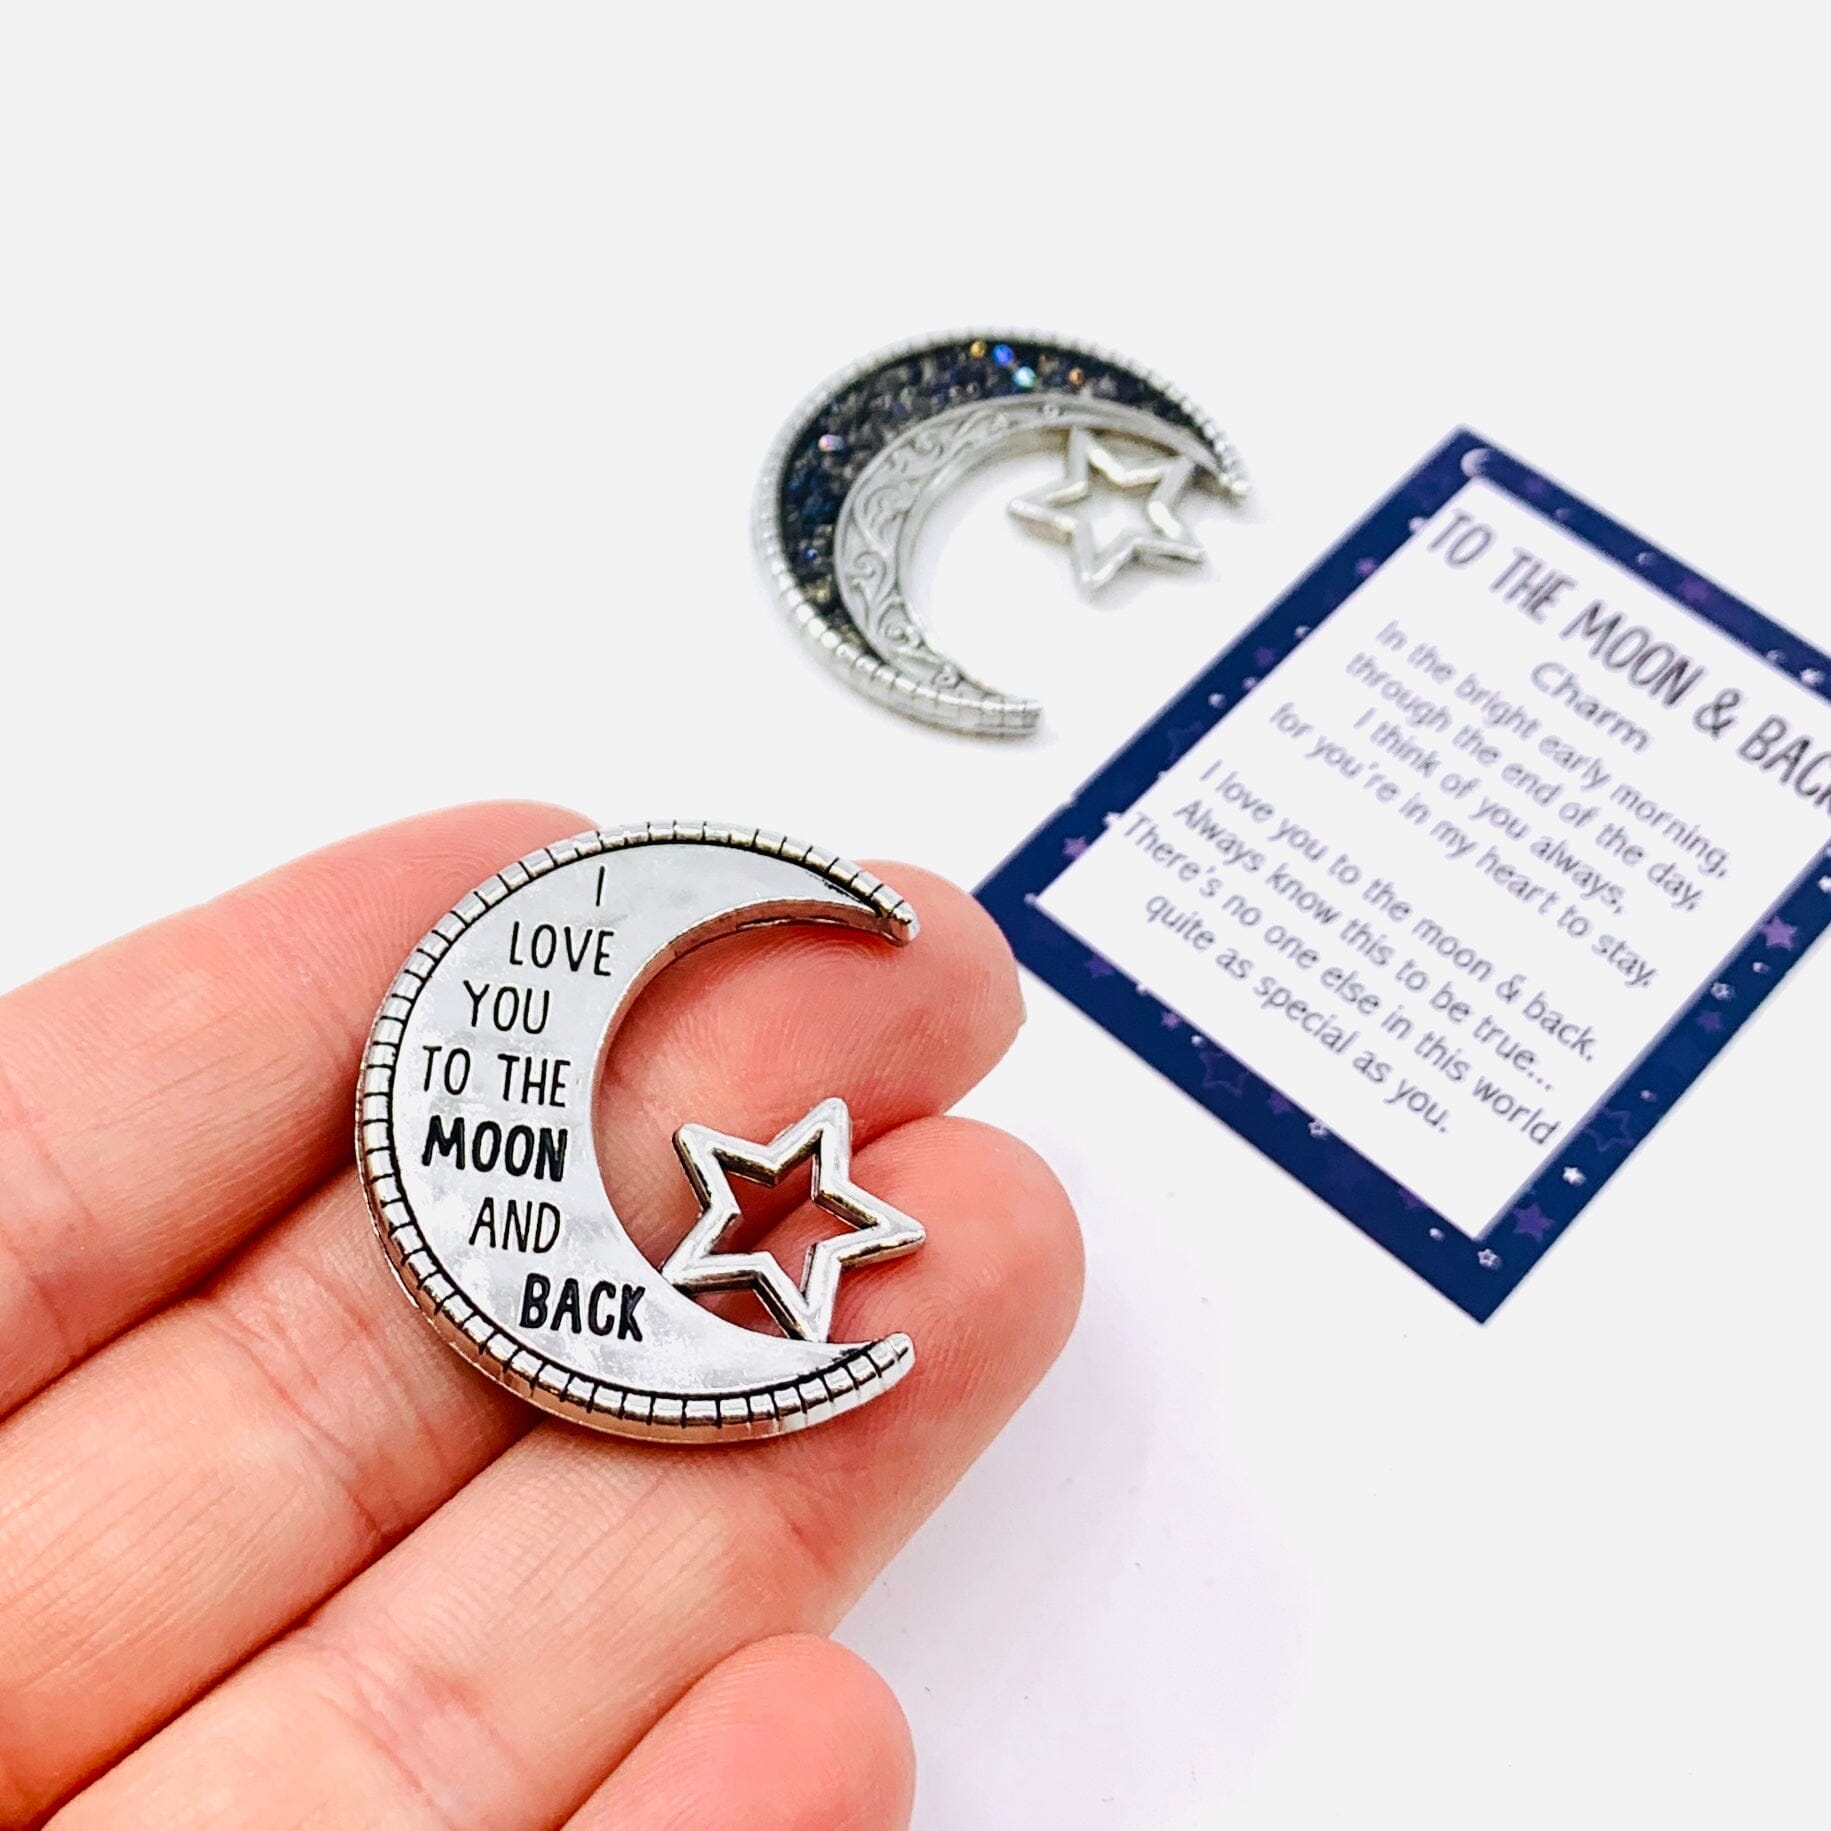 To The Moon And Back Pocket Charm PT67 Miniature GANZ 